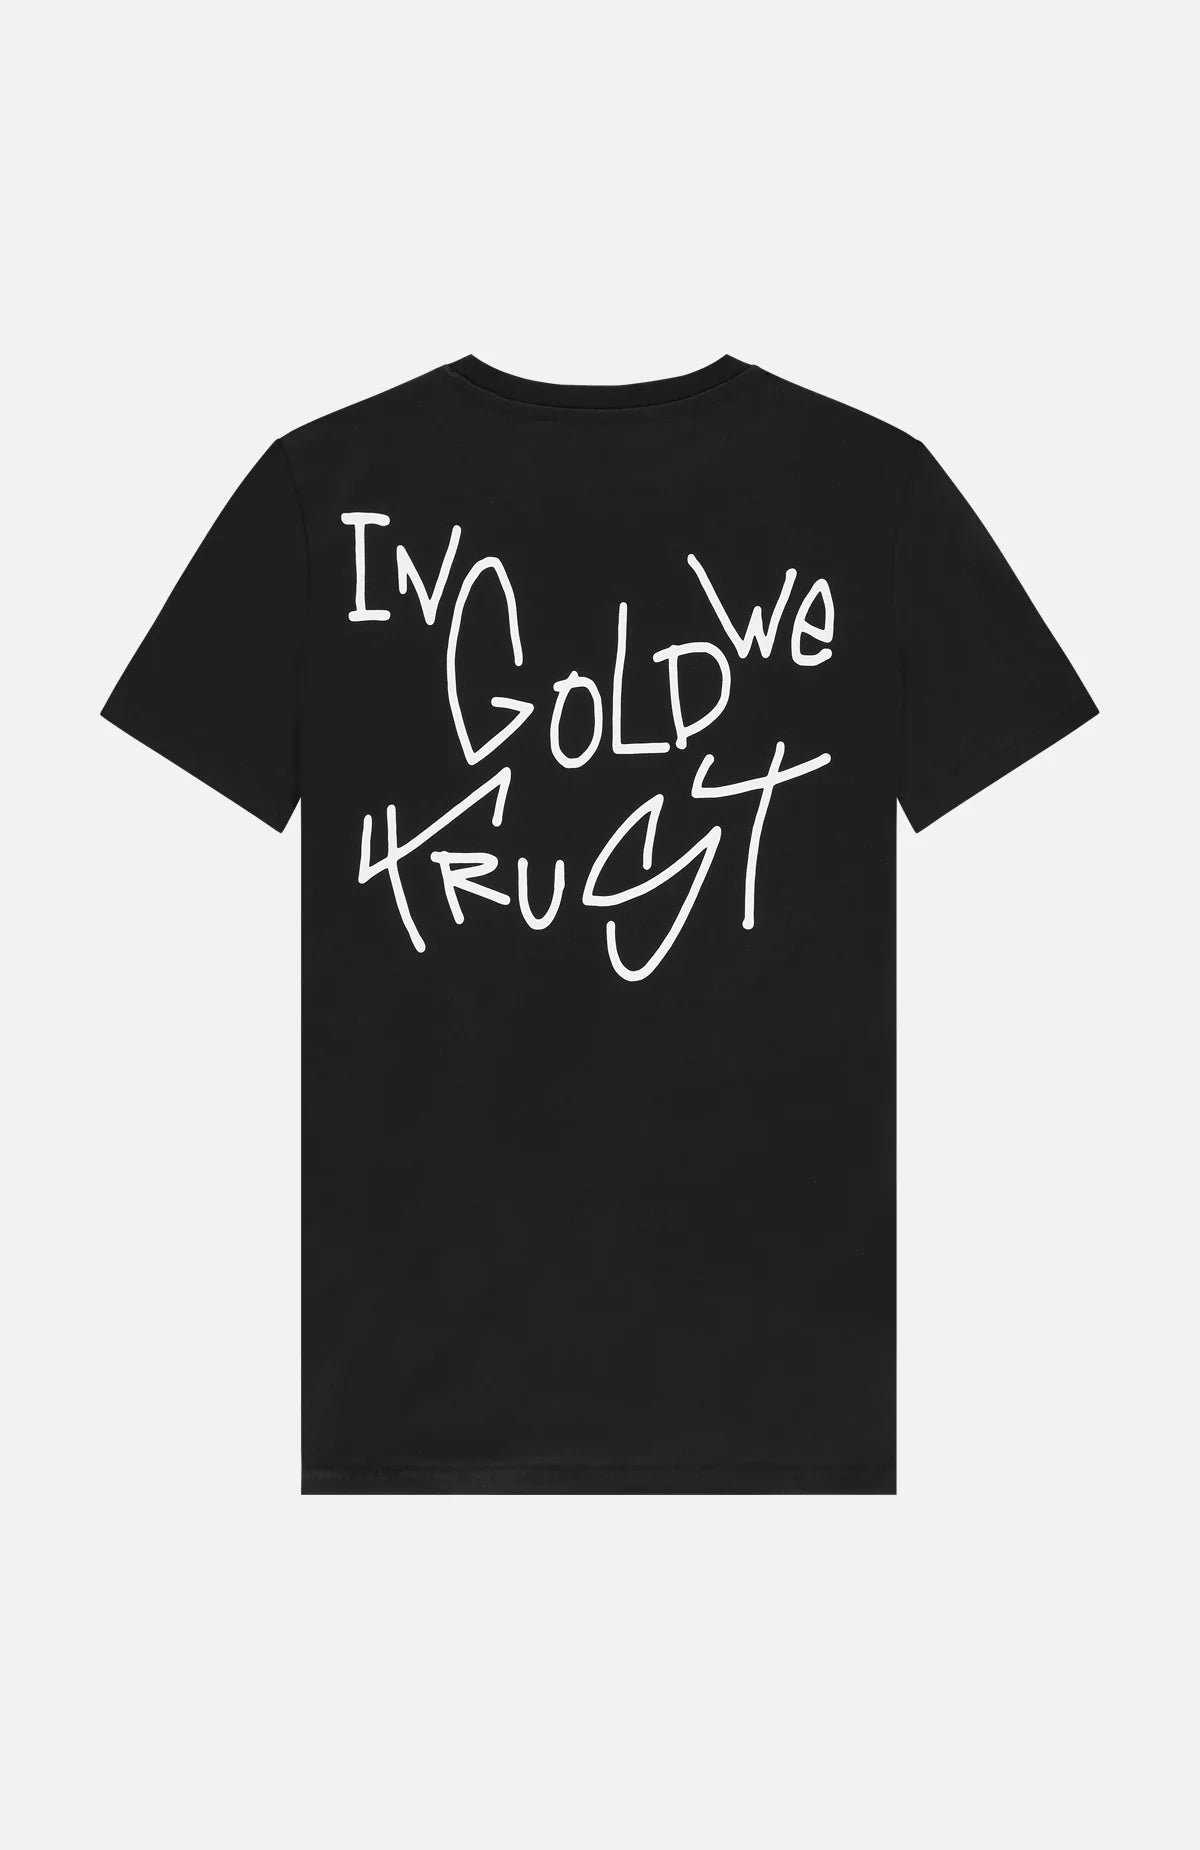 In gold we trust the koston t-shirt - black